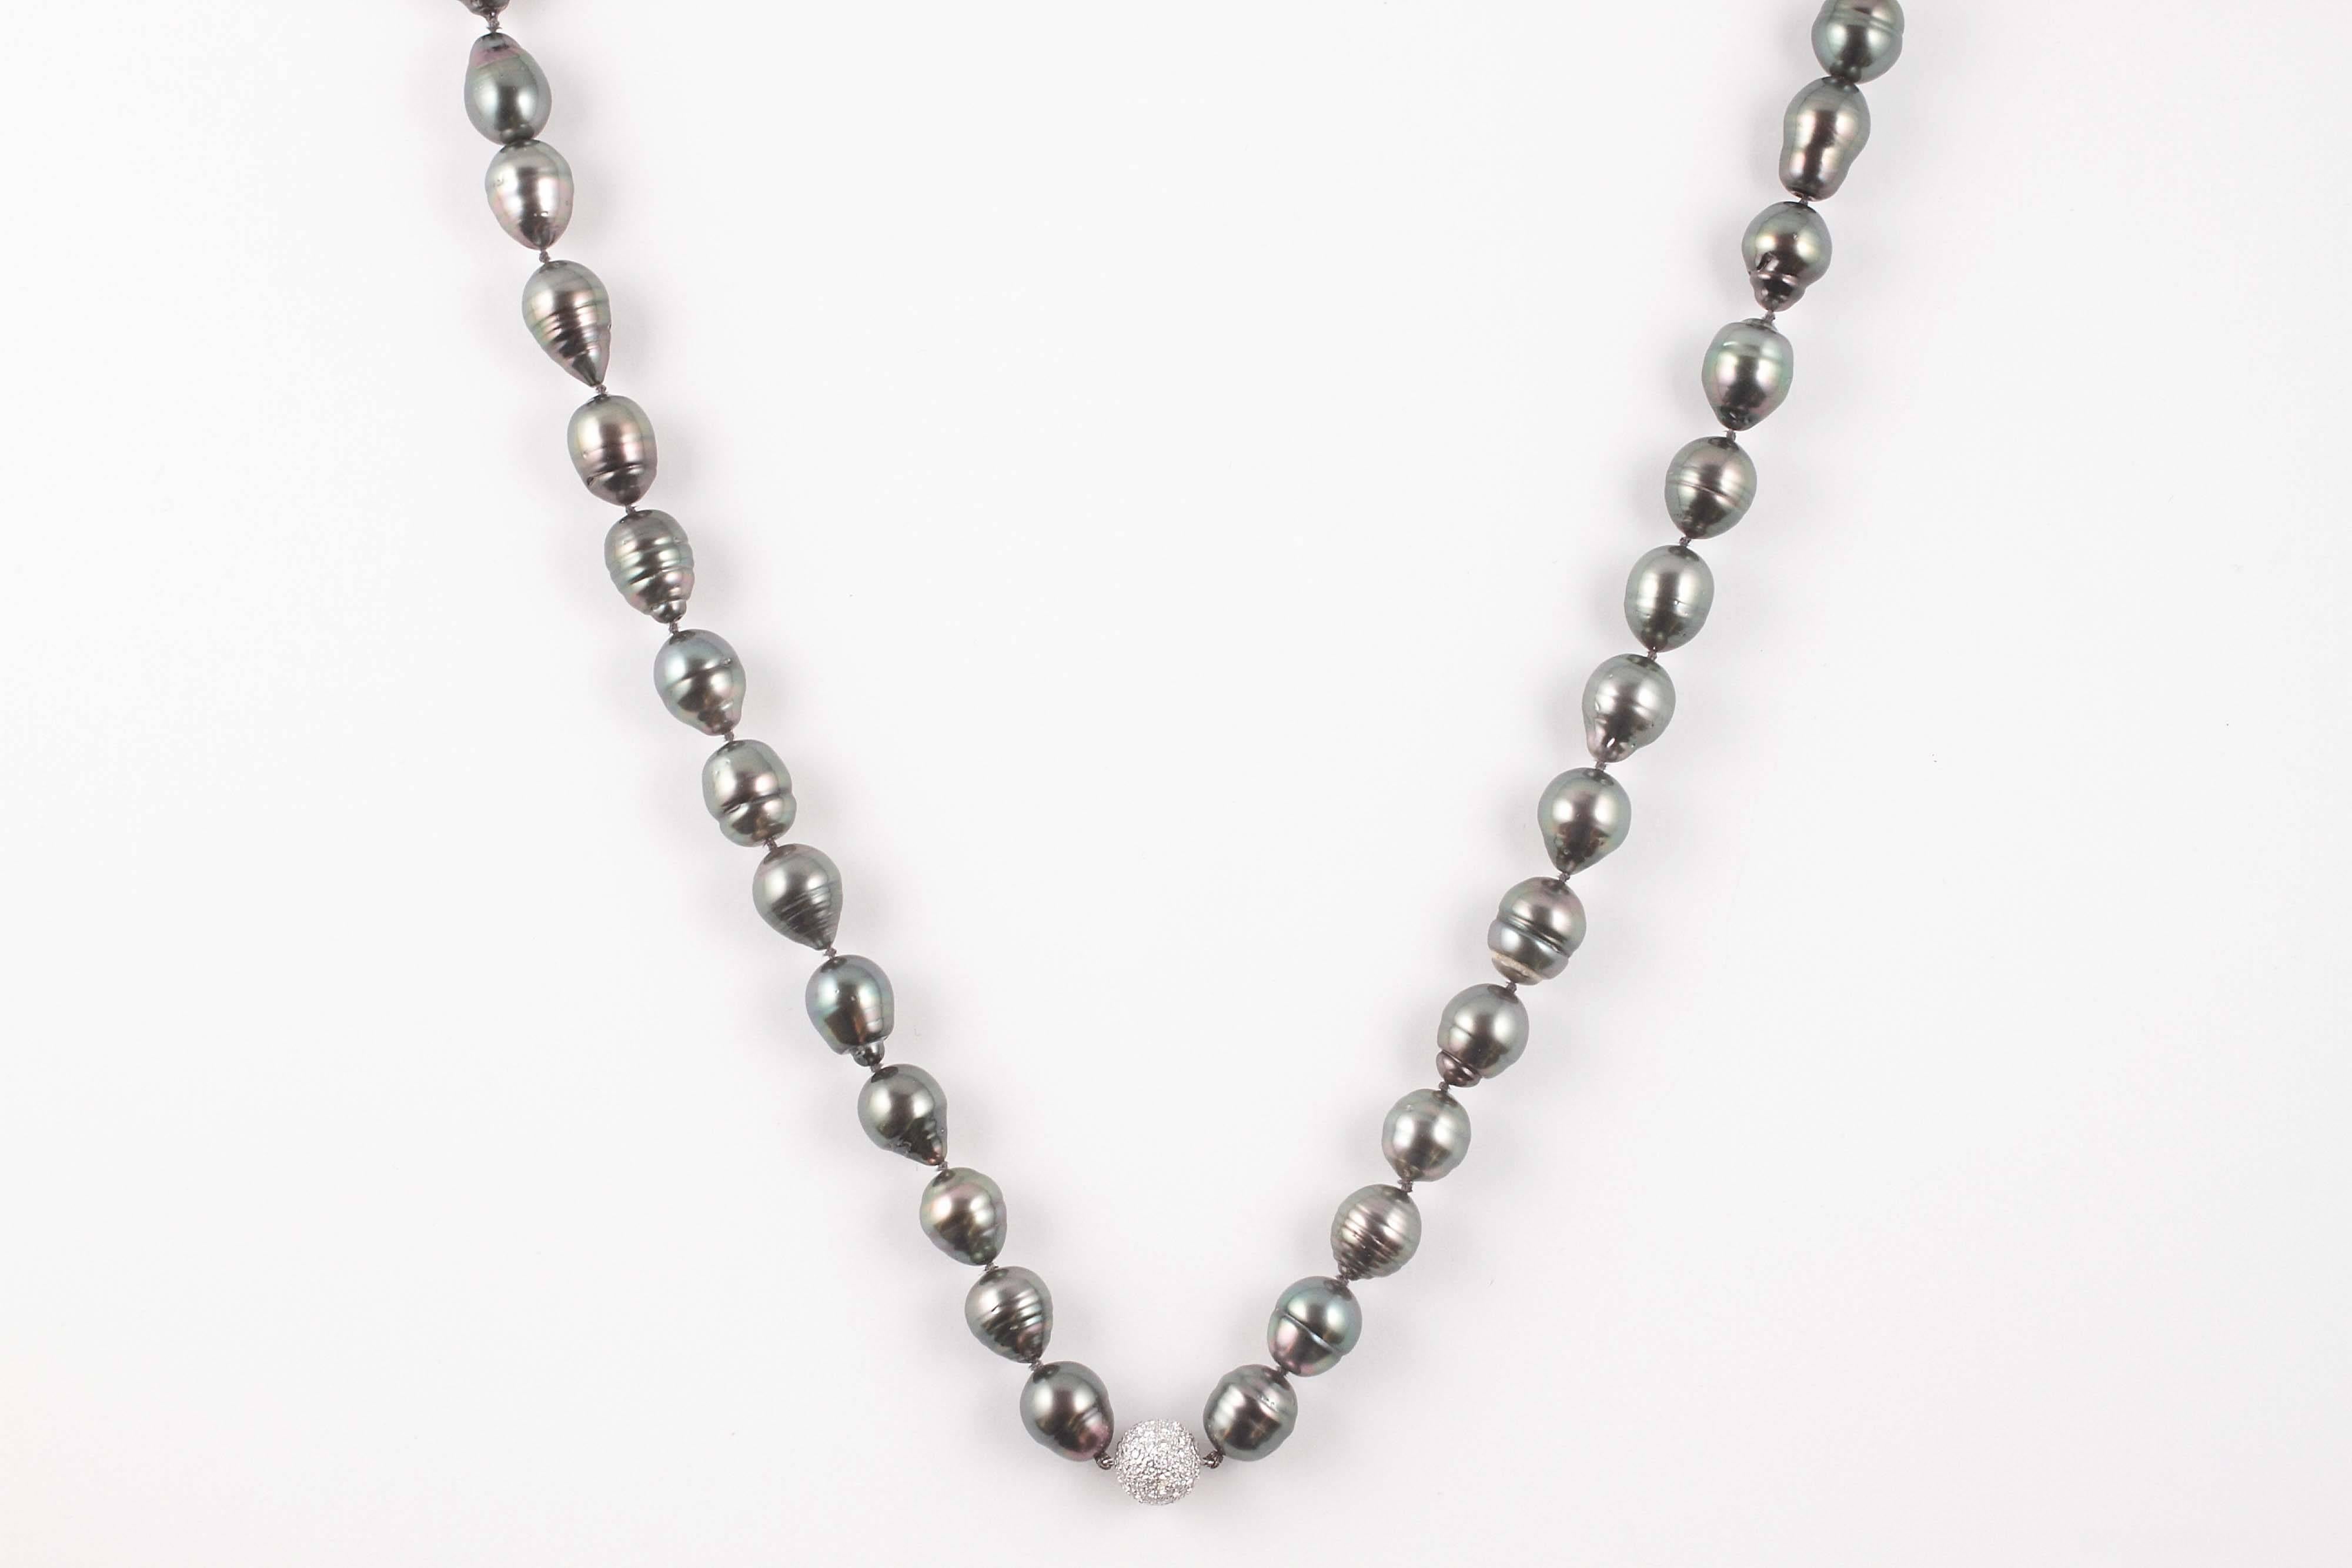 Contemporary Stunning Strand Natural Color Tahitian Cultured Pearls Diamond Clasp